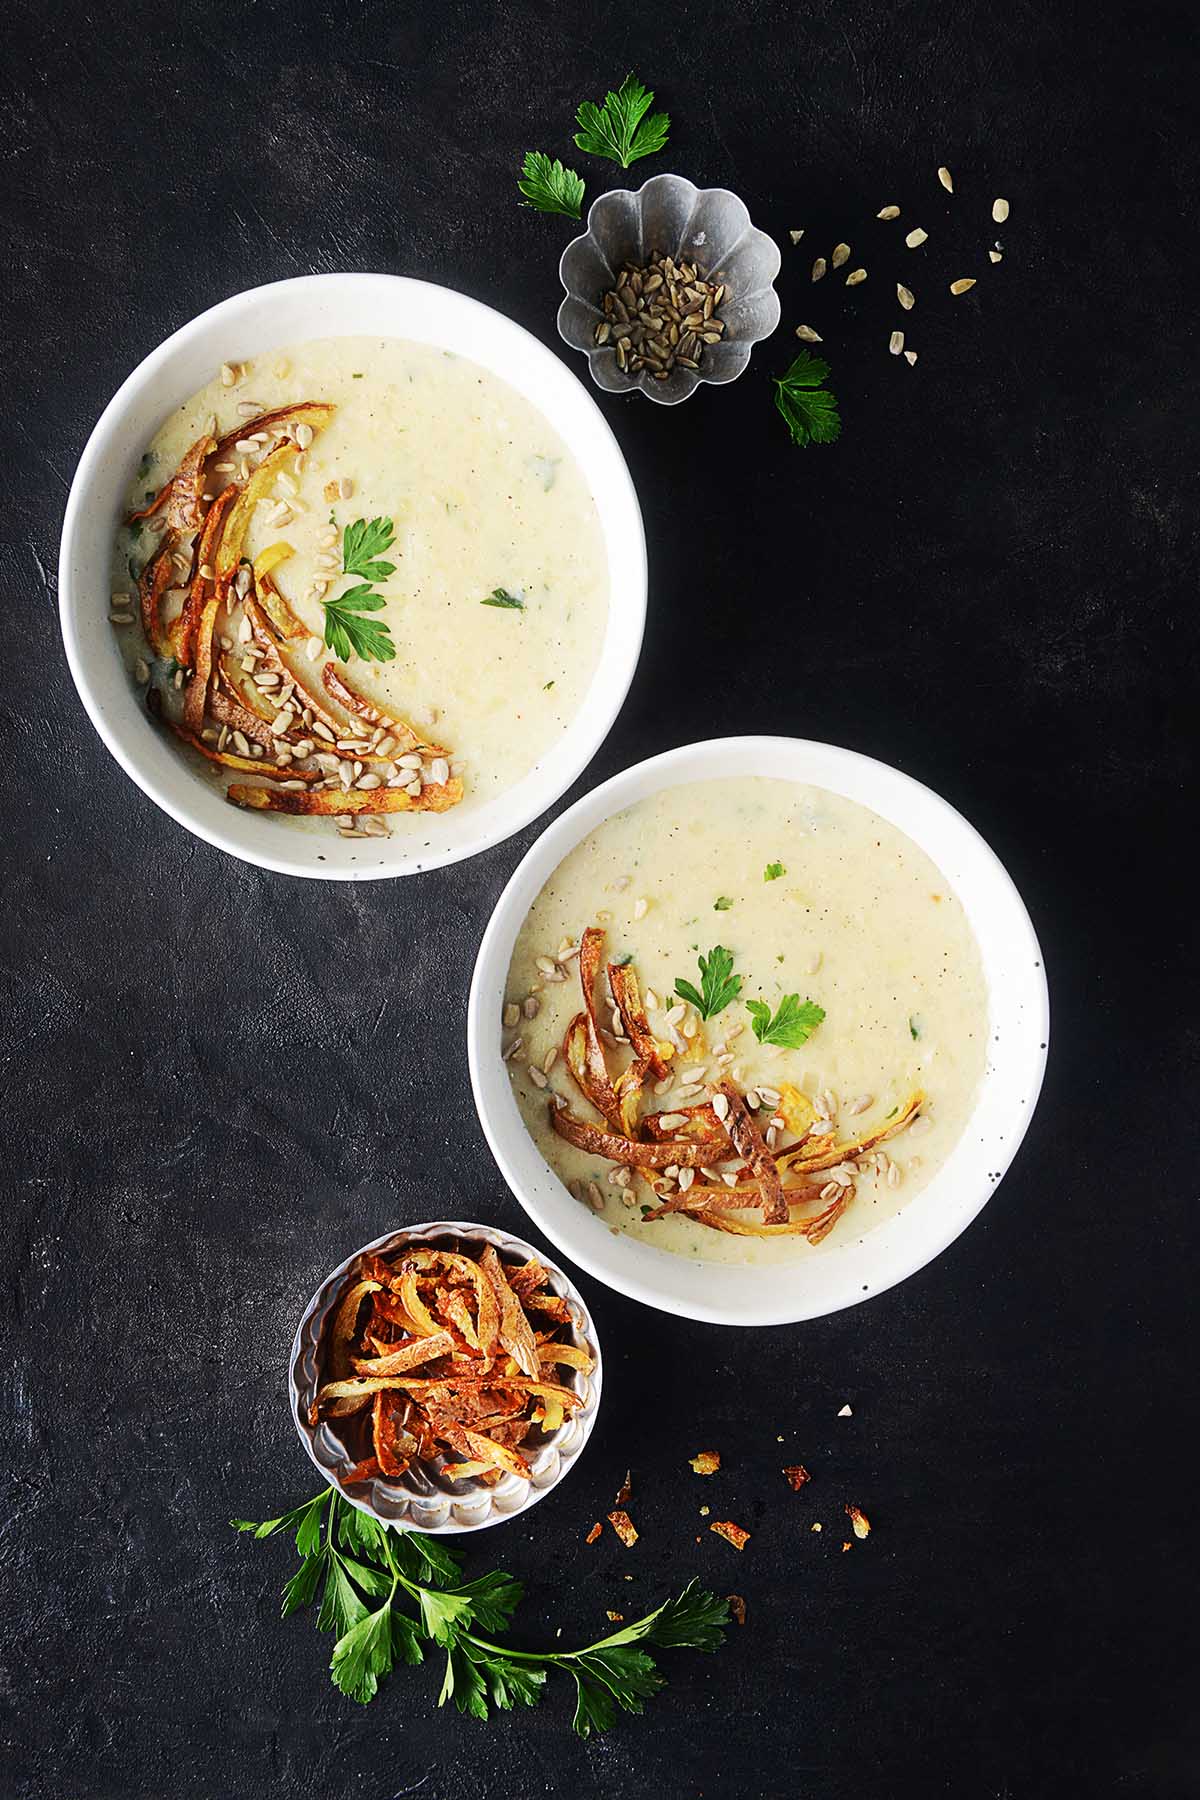 Two bowls of dairy free potato soup garnished with parsley and seeds.